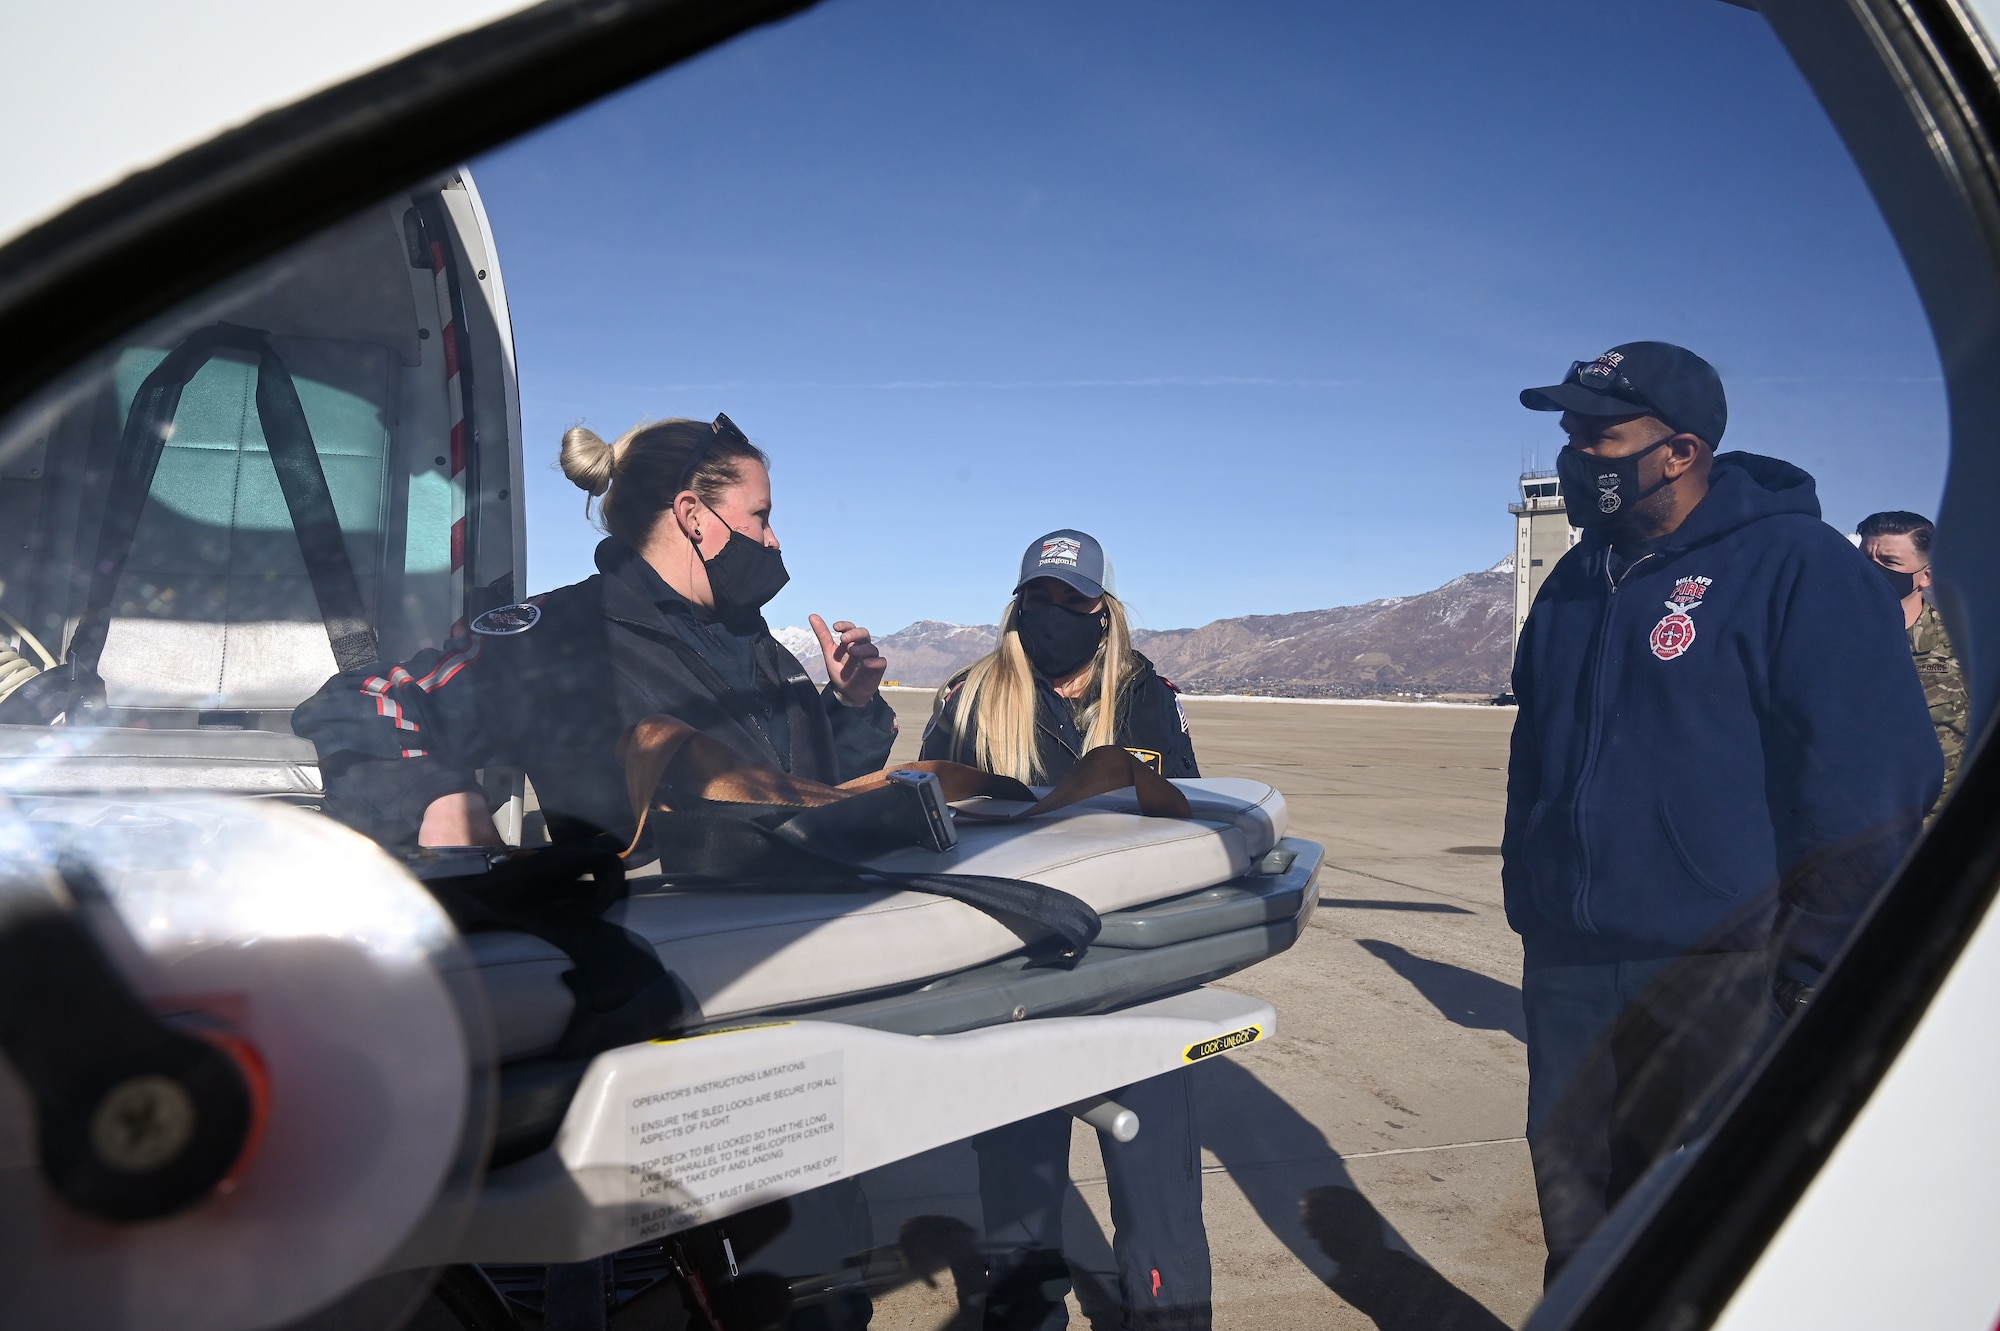 Erica Rau (left) and Crystal Causey, AirLIfe Utah trauma clinicians, speak with Zack Olds, Hill firefighter, during an air ambulance training event at Hill Air Force Base, Utah, Jan. 14. 2021. Hill's first responders conduct the annual training to remain proficient on air ambulance operations. The Ogden AirLIfe Utah base is located at Ogden Regional Medical Center. (U.S. Air Force photo by R. Nial Bradshaw)